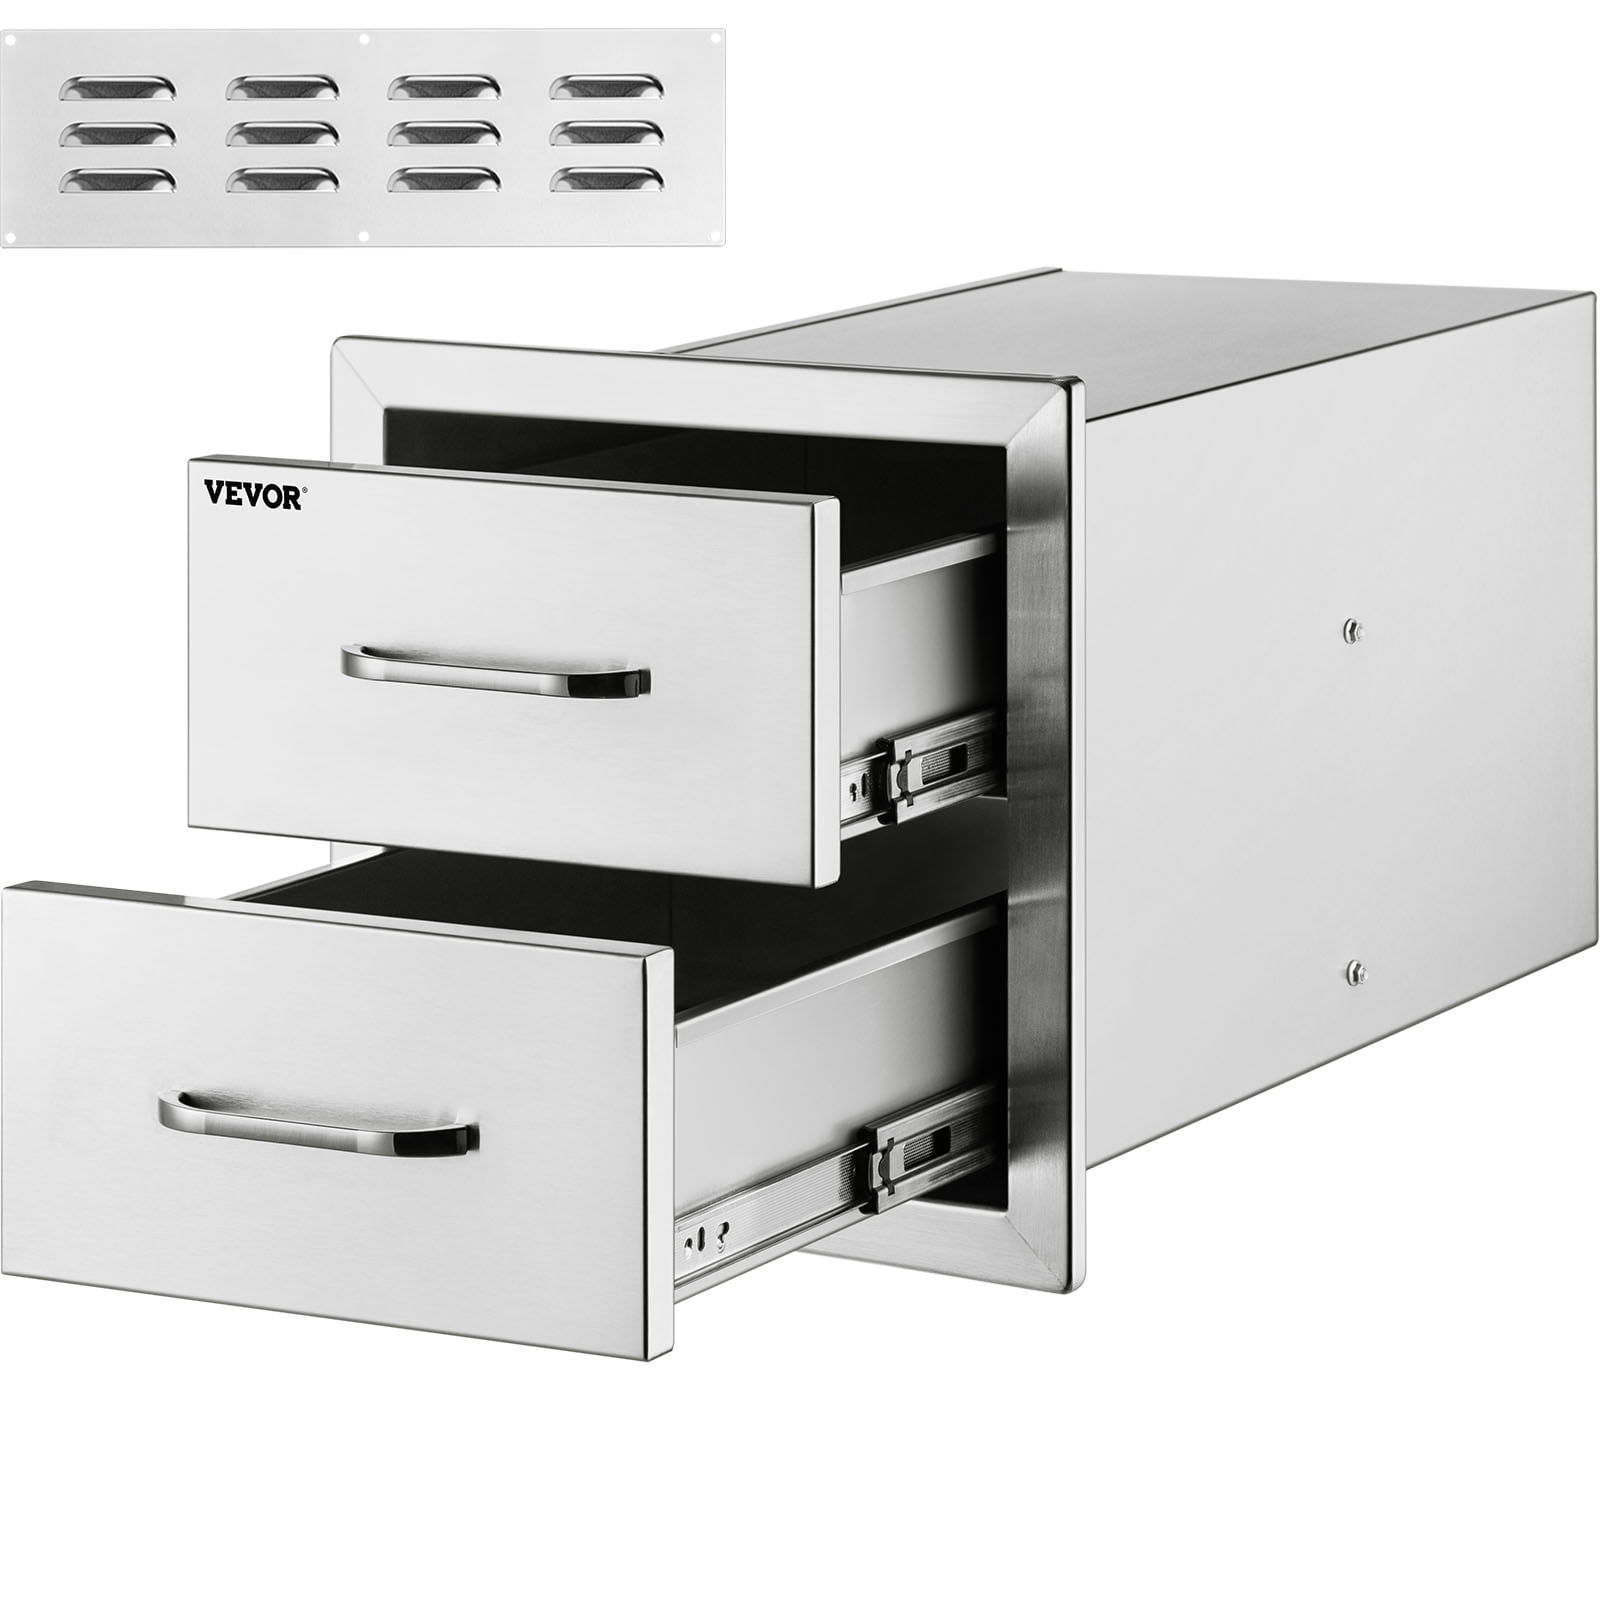 VEVOR 20x20.20 inch Outdoor Kitchen Drawers Stainless Steel, Flush Mount  Triple Drawers, 20W x 20.20H x 220D inch, with Stainless Steel Handle, BBQ ...